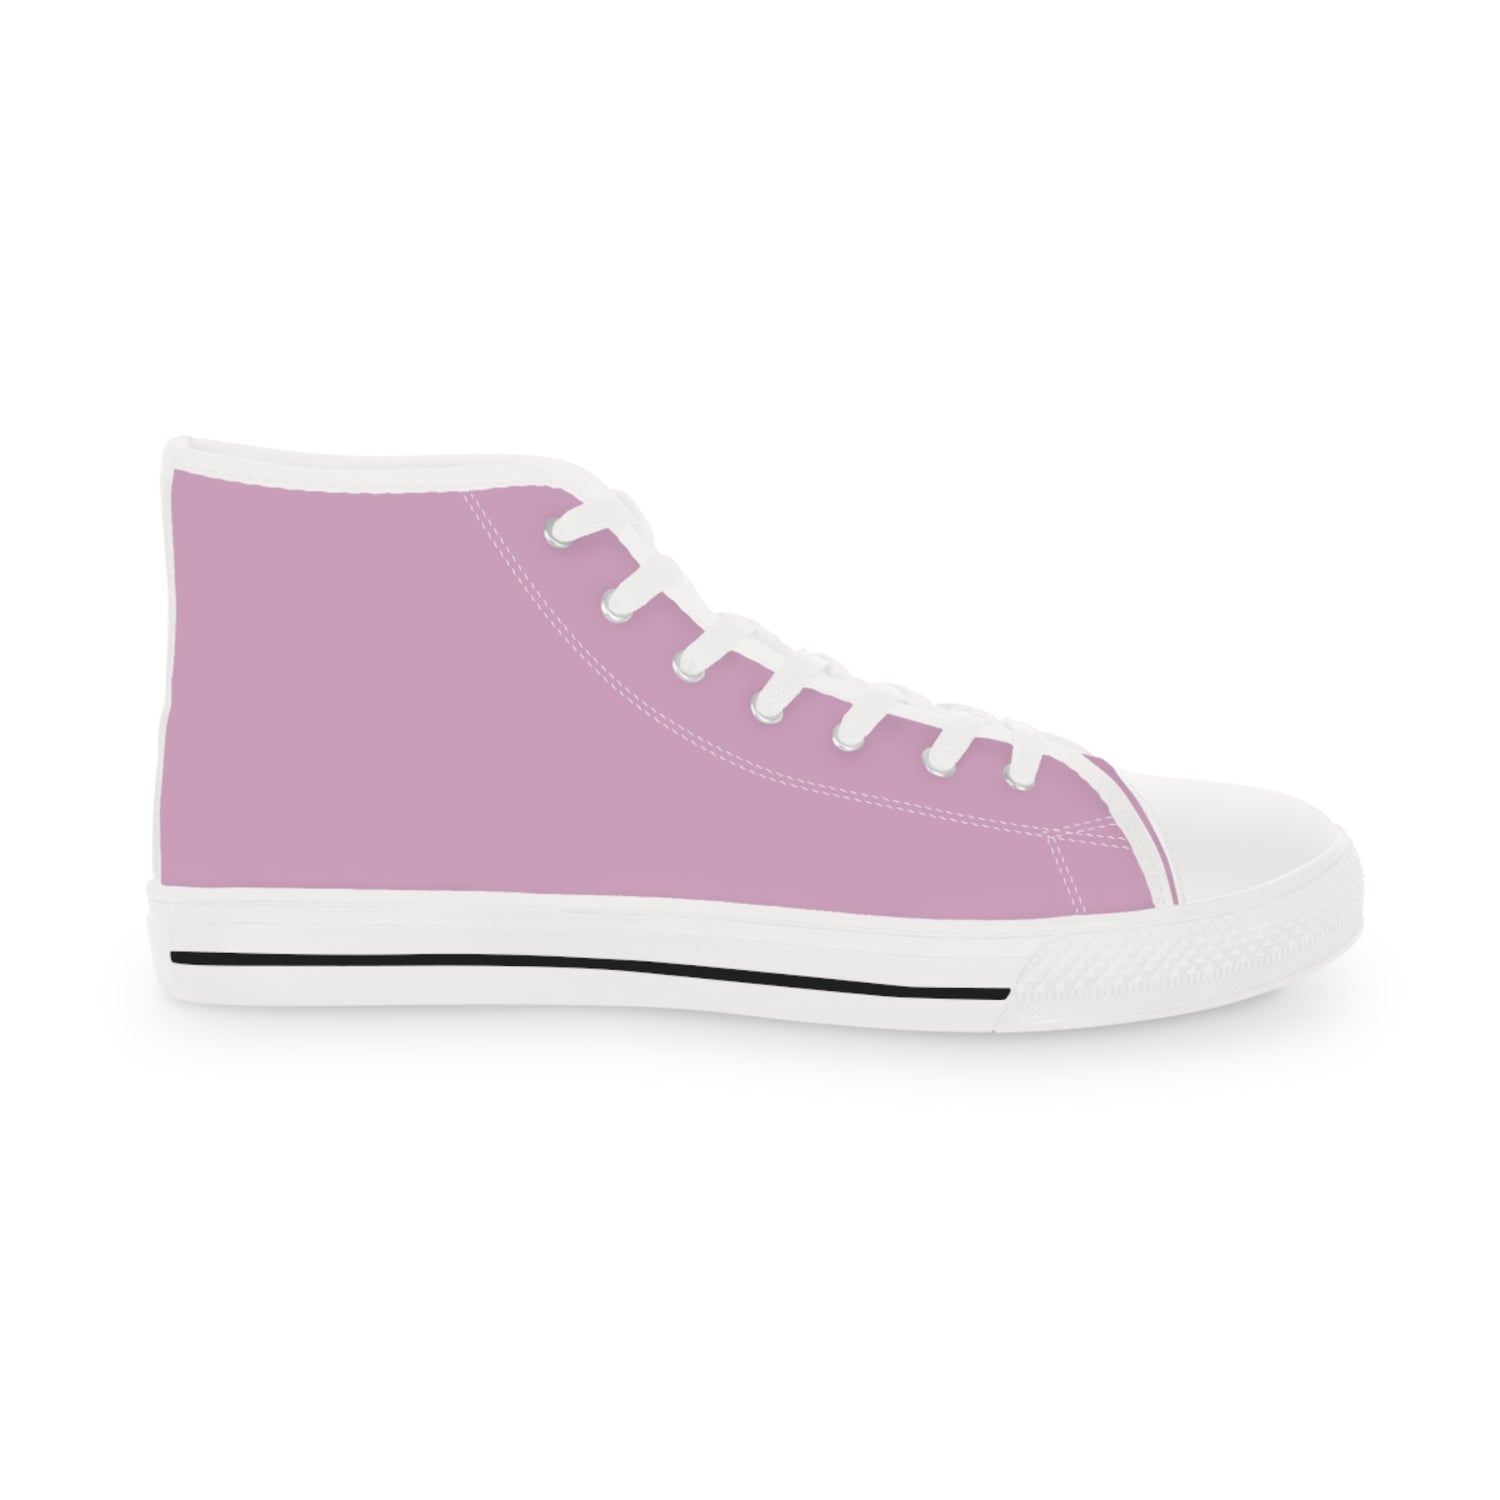 Women's High Top Solid Color Canvas Sneakers